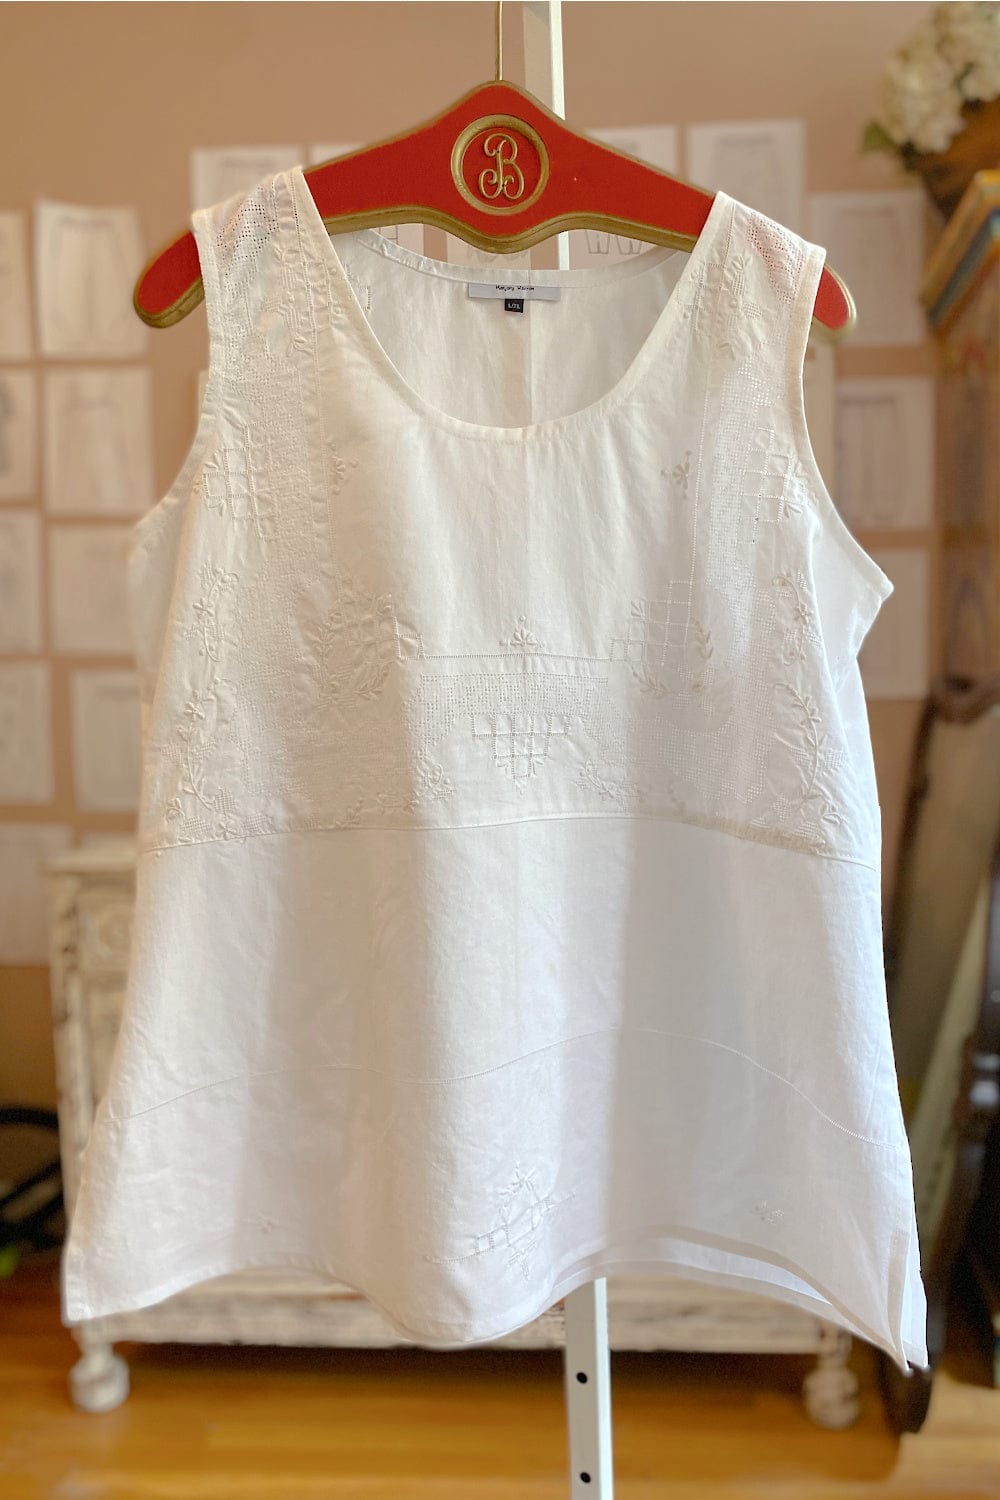 Stitch detailed white cotton tank hanging on a red vintage hanger.